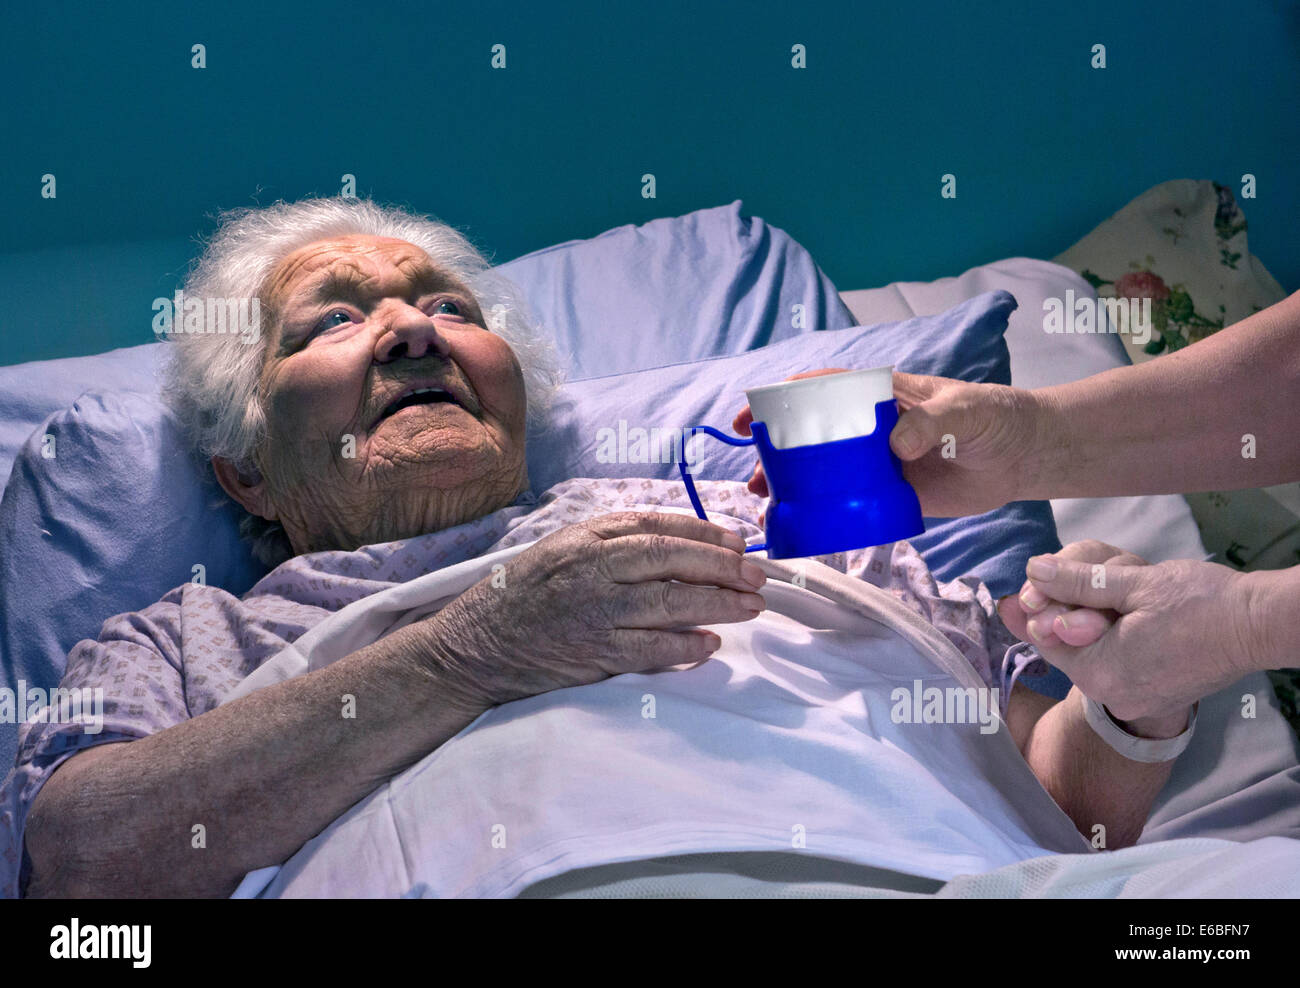 Contented smiling senior old age elderly lady in hospital bed comforting hand of carer nurse with hydration hydrating fresh cup of water Stock Photo